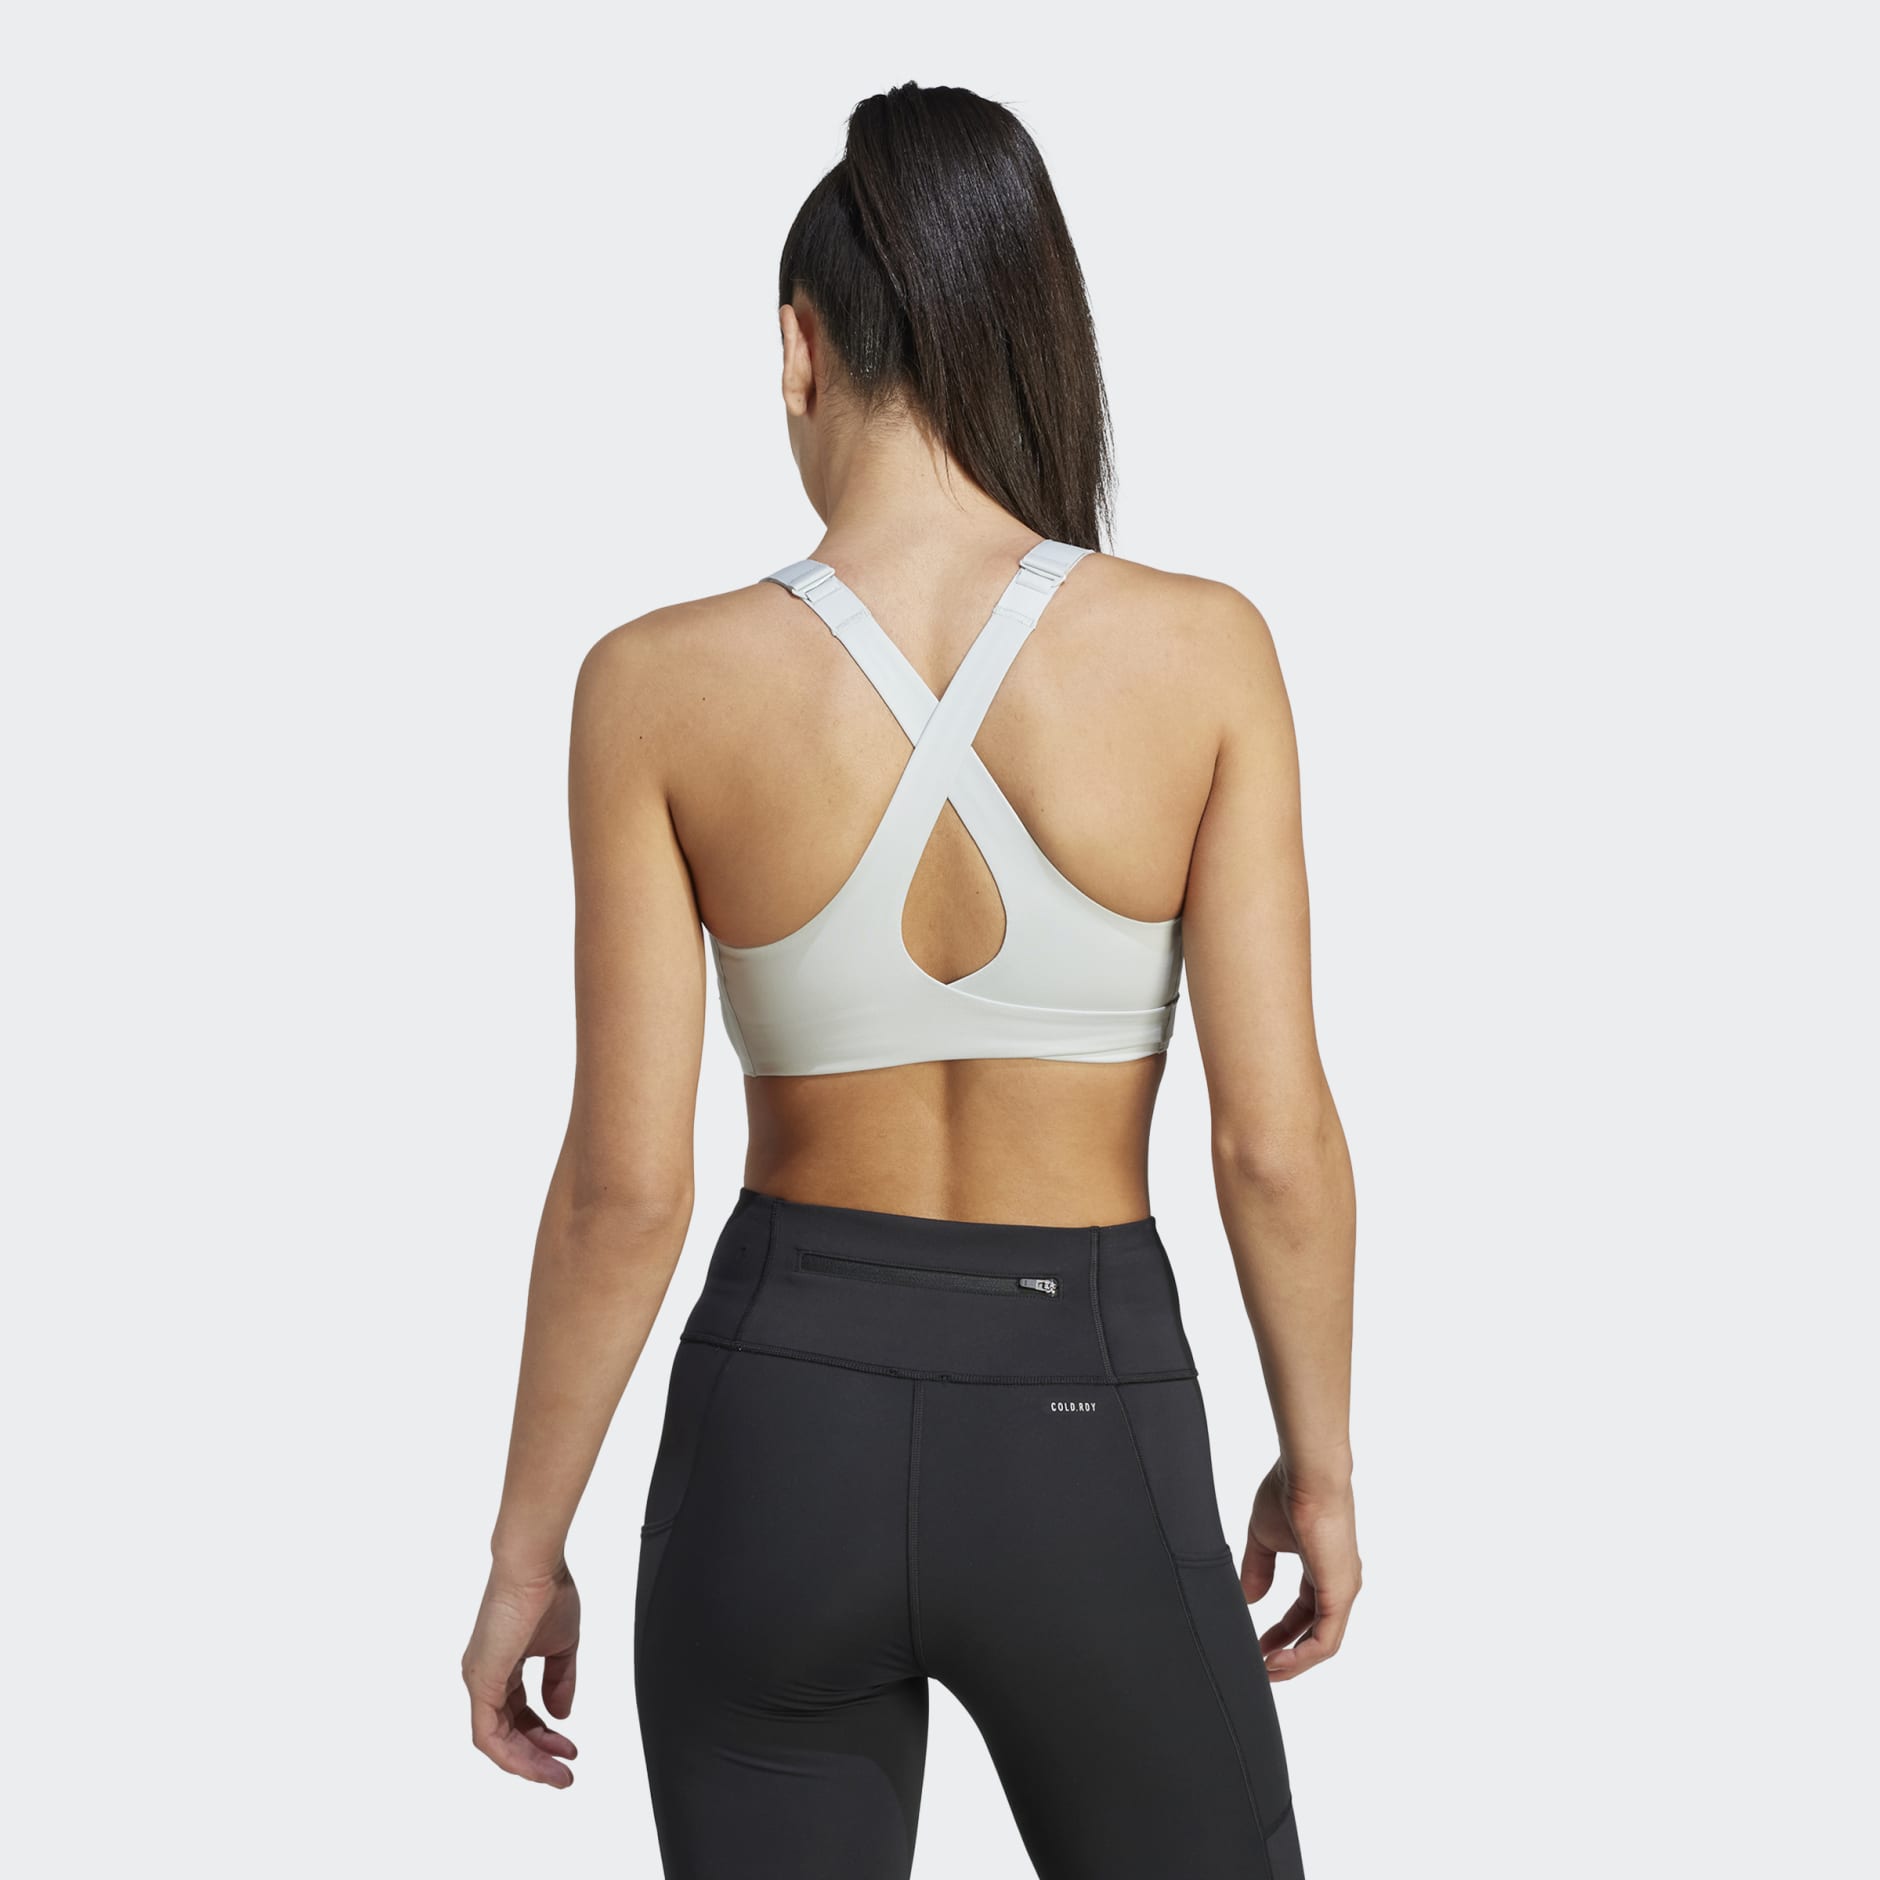 adidas Collective Power Fastimpact Luxe High-Support Bra